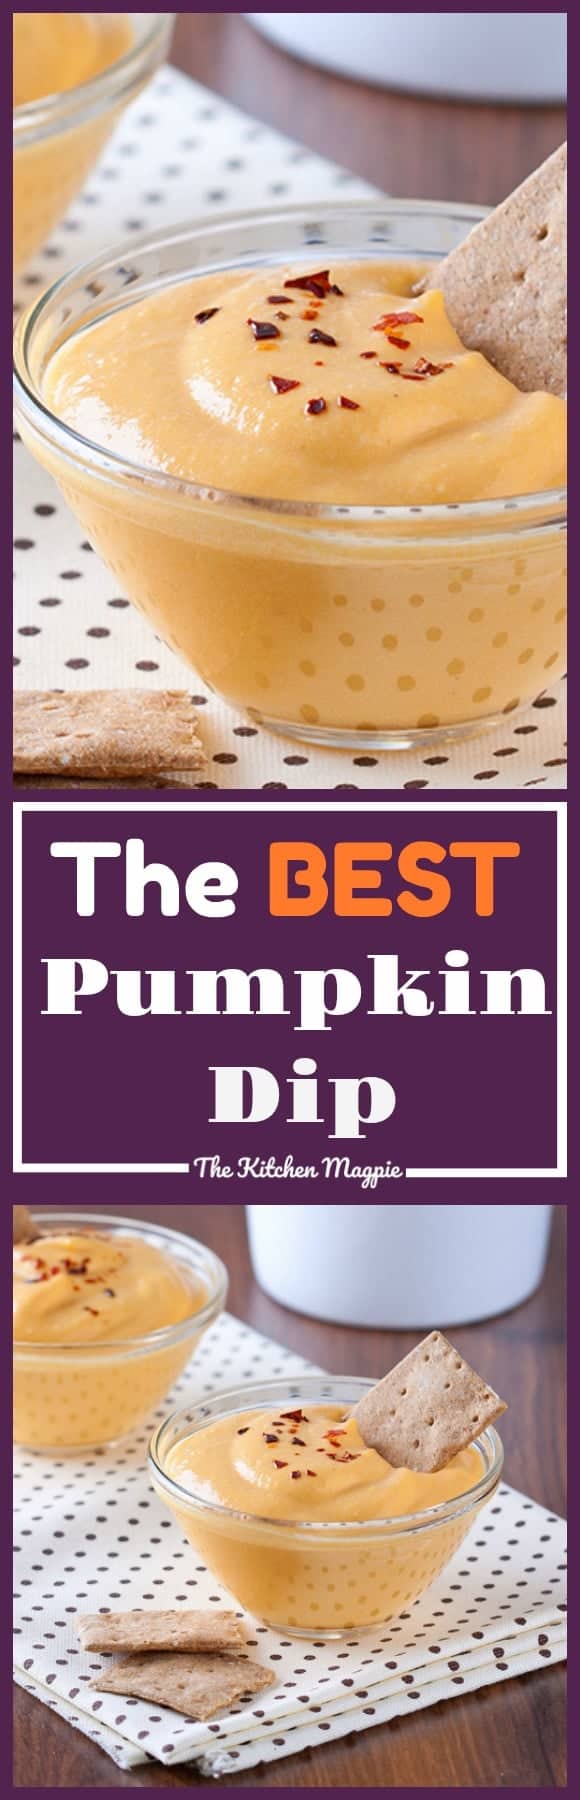 Pumpkin dip made with cream cheese, canned pumpkin and spices! You won't be able to stop eating it!#pumpkin #recipe 